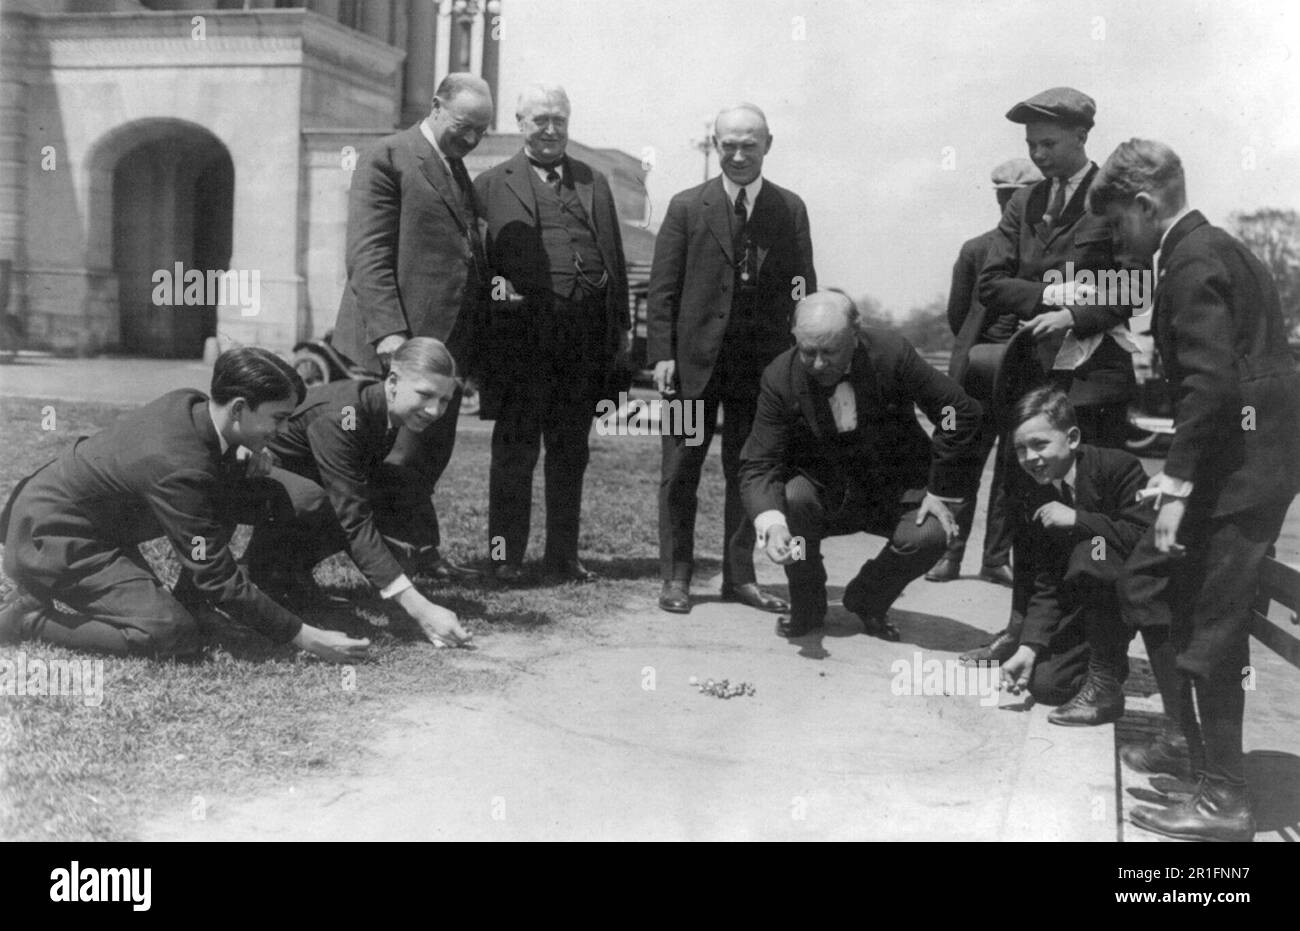 Archival Photo: A marble championship between Senator and Pages - Senator Ralston leading off - Senators Magnus Johnson, Overman and Fess waiting their turn ca. 1924 Stock Photo